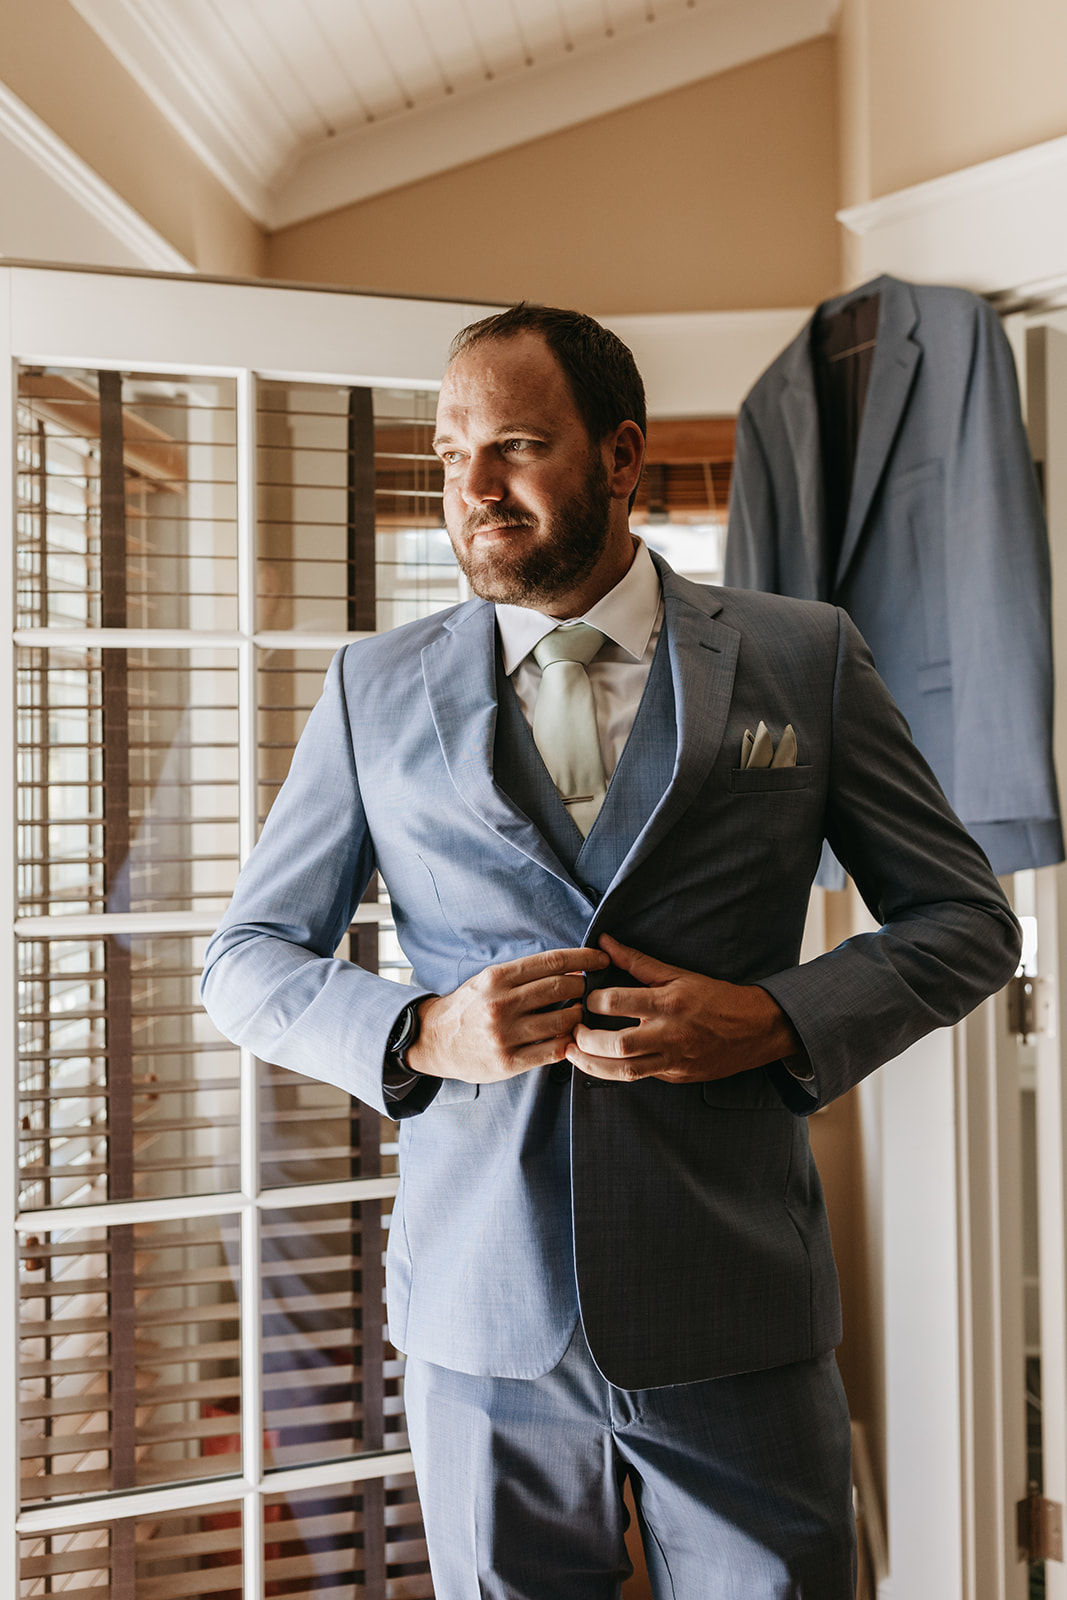 groom buttoning his suit |The Penny: A Downtown Wedding Venue in San Luis Obispo